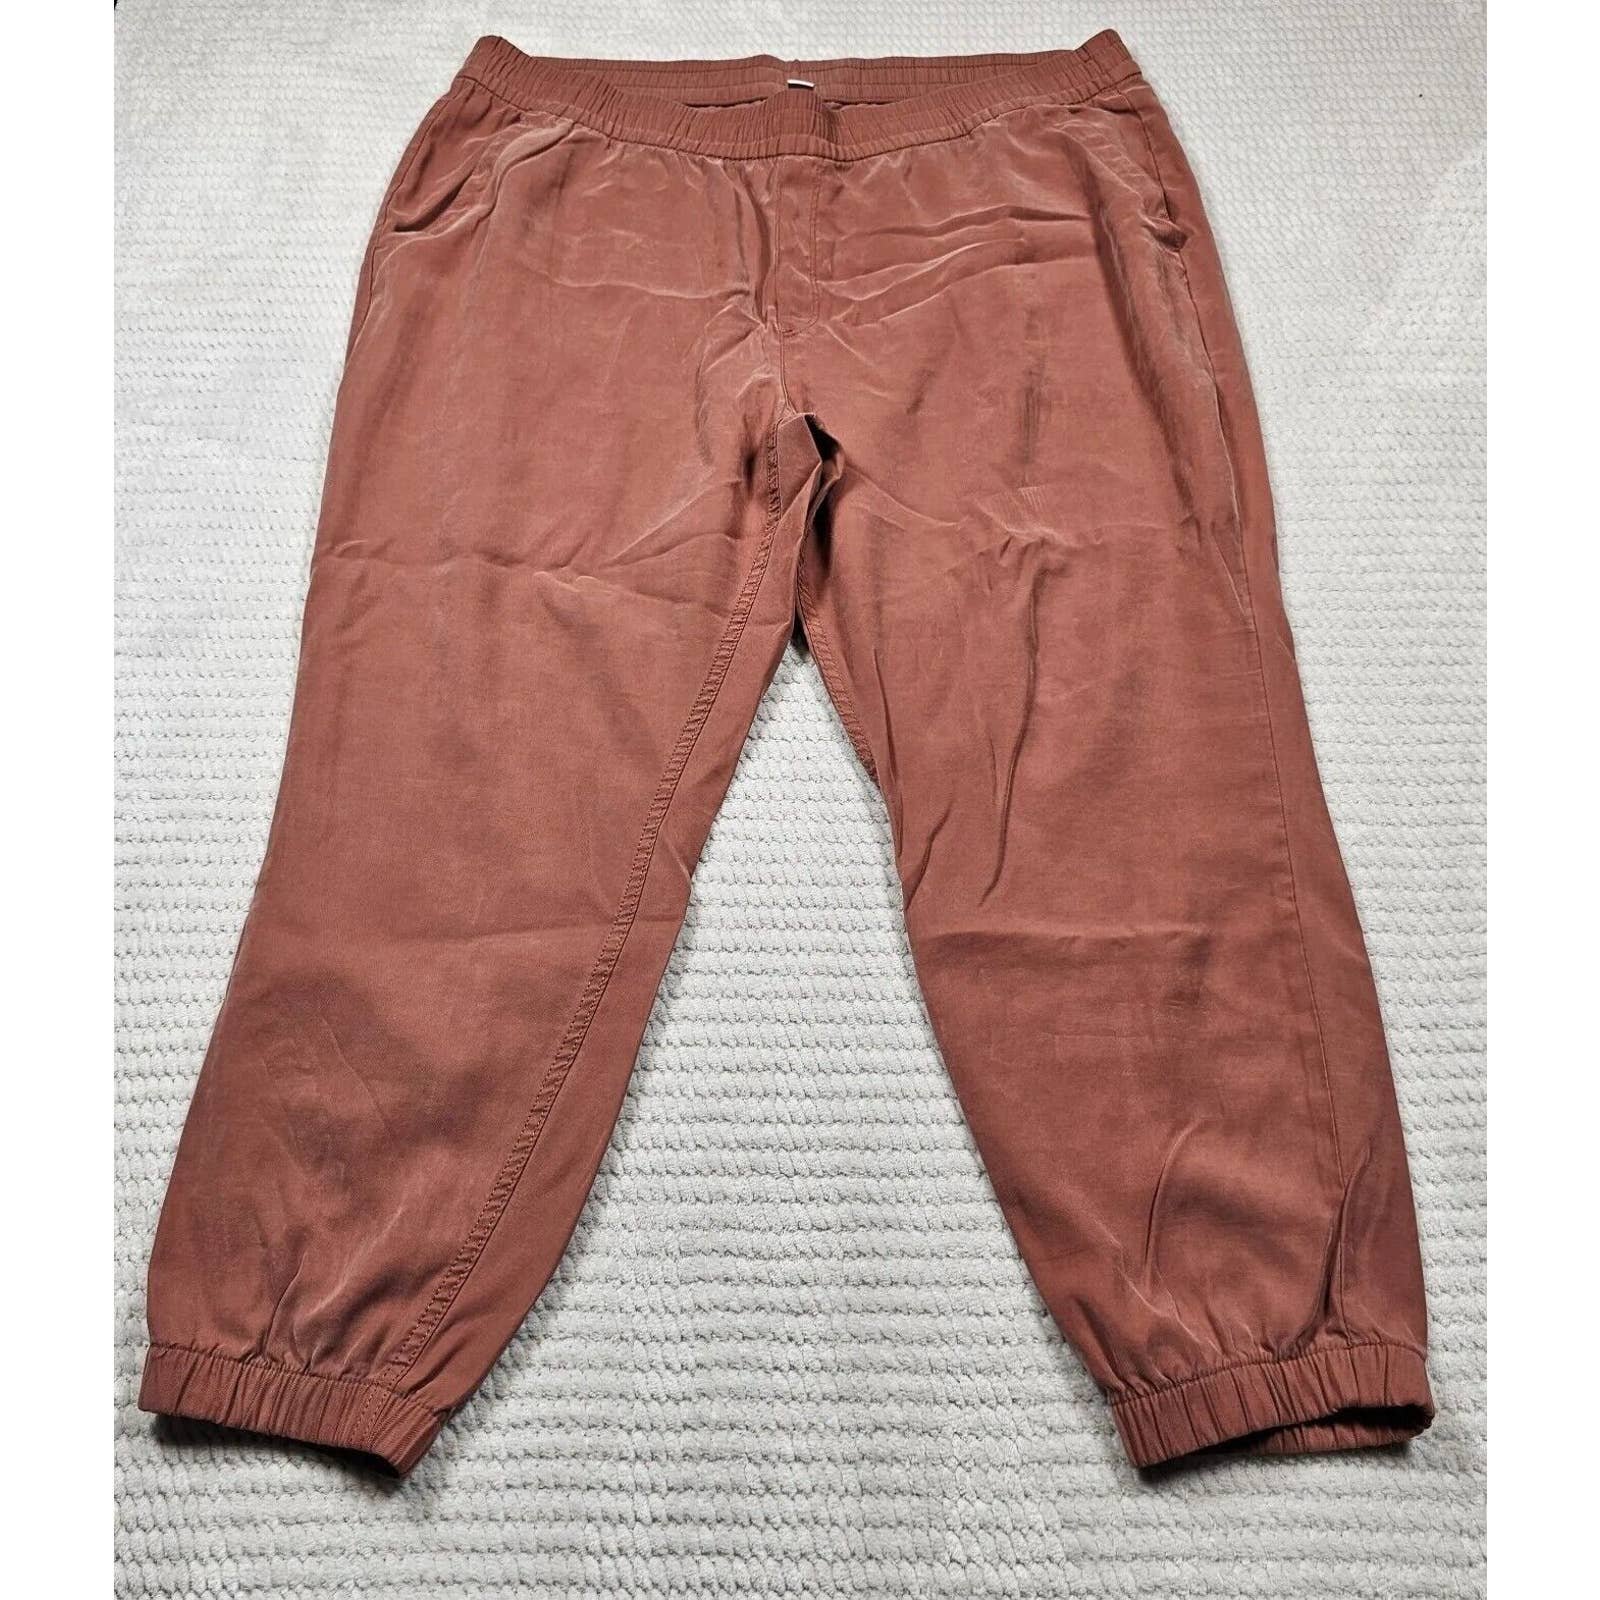 Exclusive Old Navy Jogger Pants Womens 2x Rust Color Light Weight Elastic Waist LC7ROgsyo hot sale